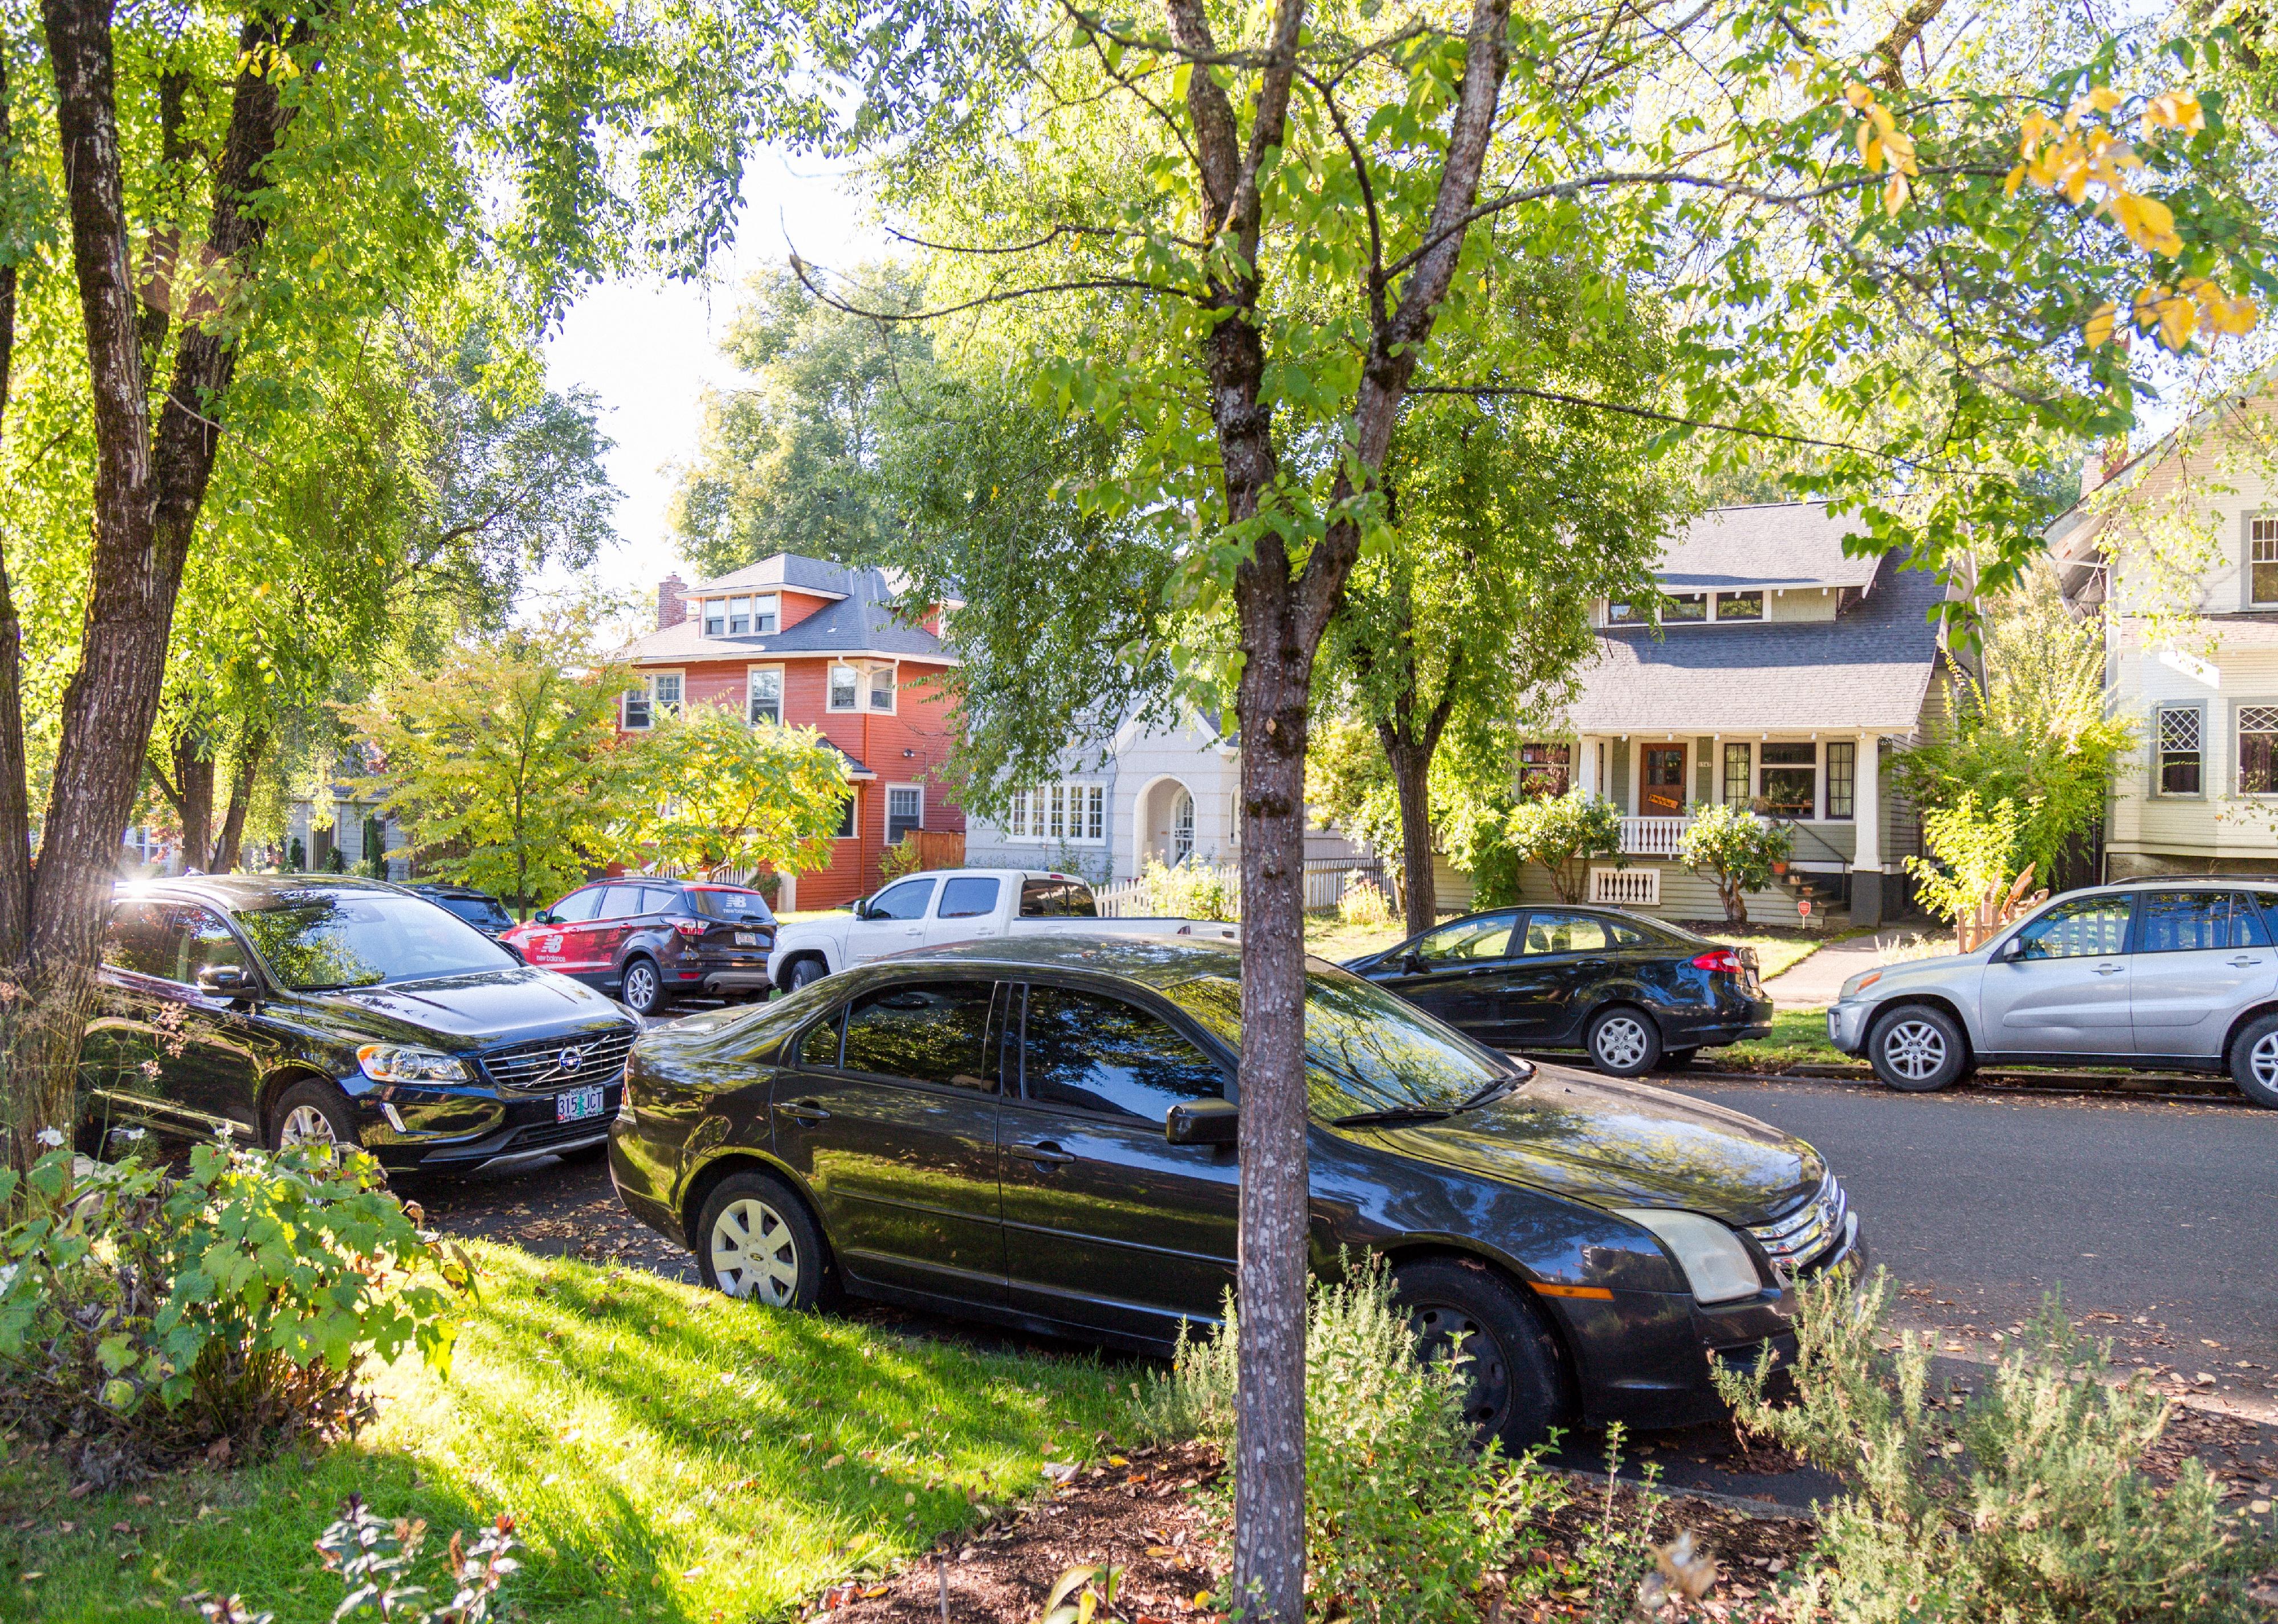 Residential neighborhood with parked cars and beautiful homes.